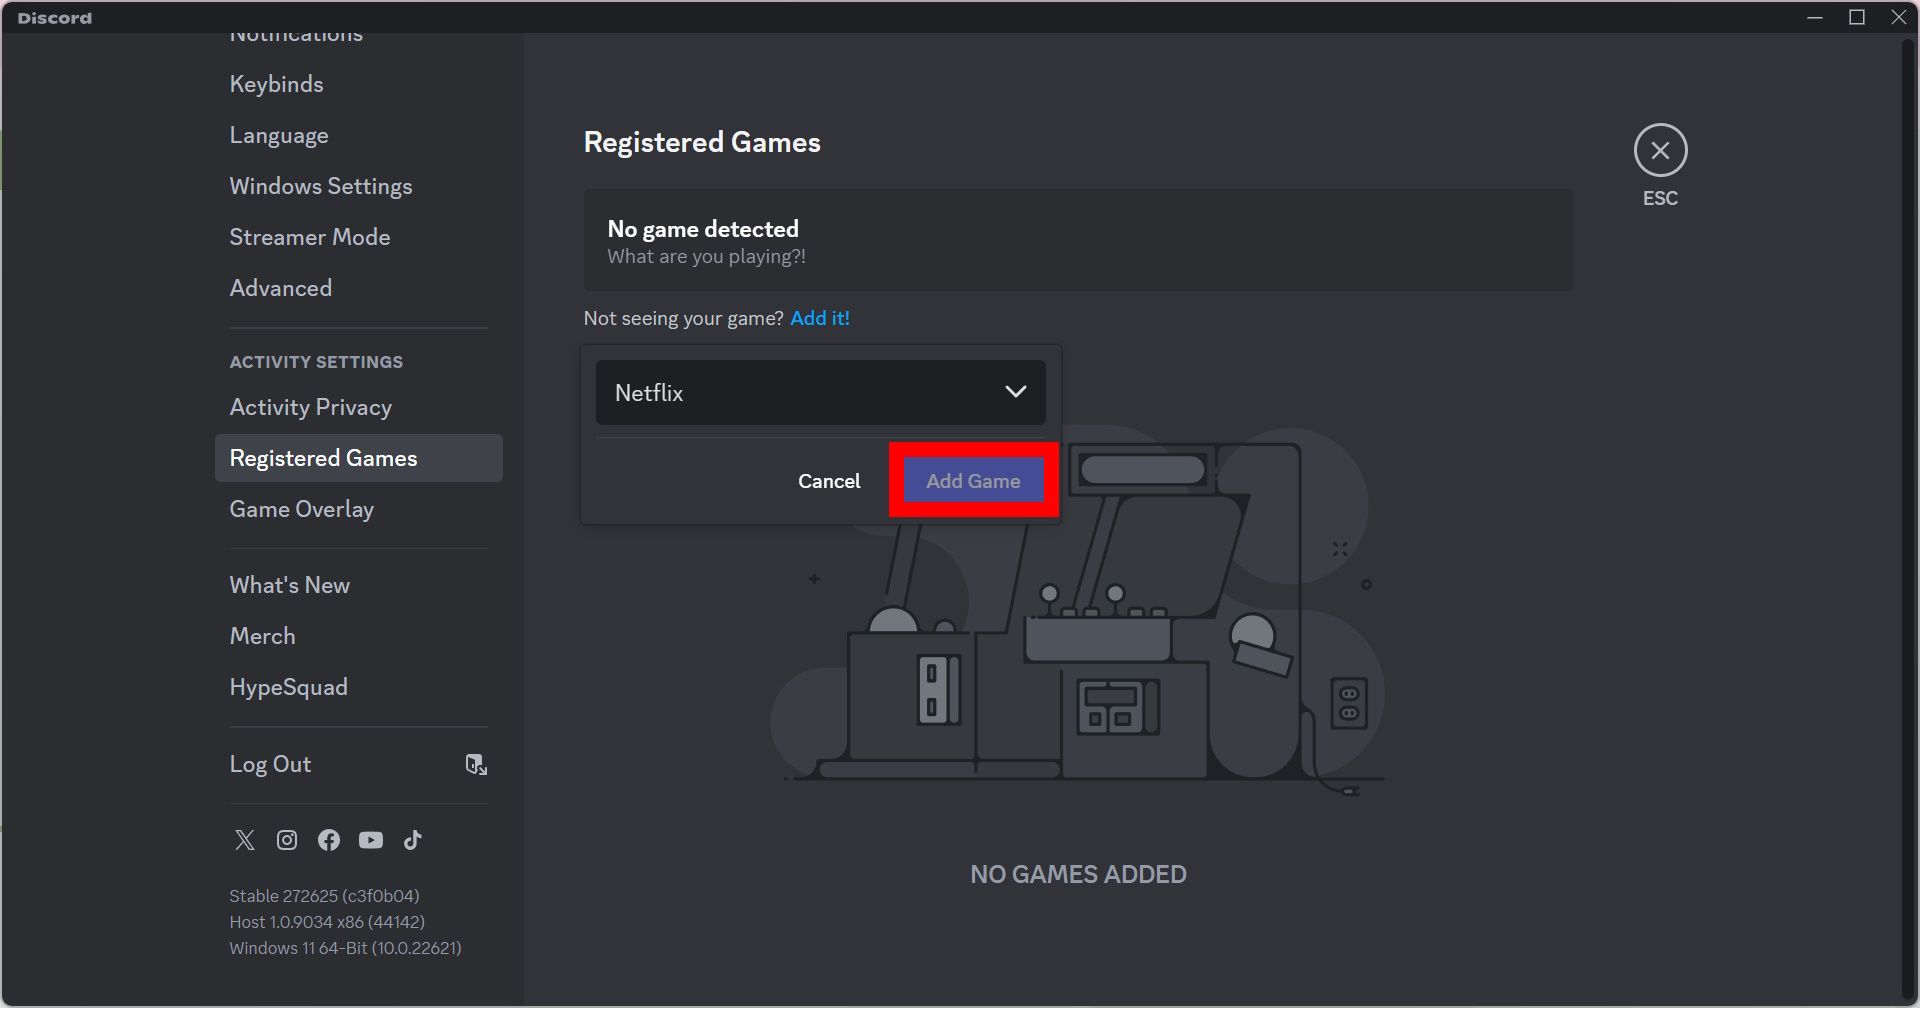 add netflix app as a game under registered games in the discord activity settings